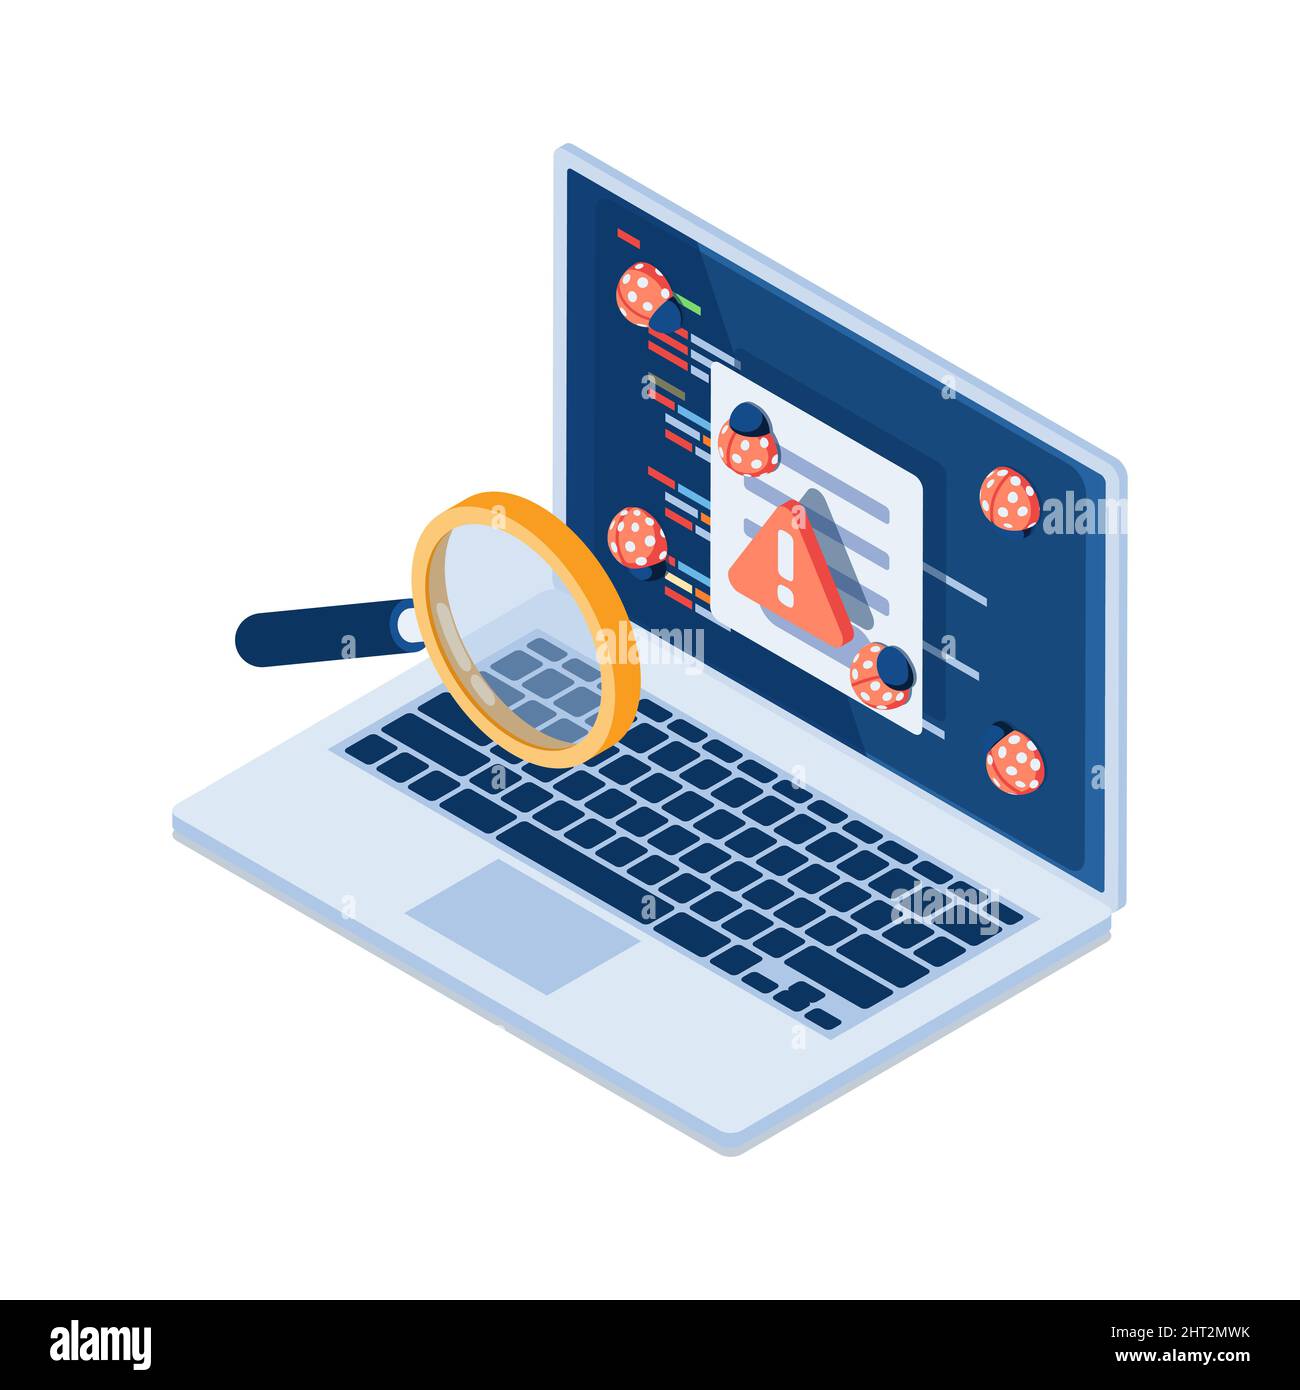 Flat 3d Isometric Magnifier Scanning Bug in The Programming Code. Software Testing and Computer Programming Concept. Stock Vector